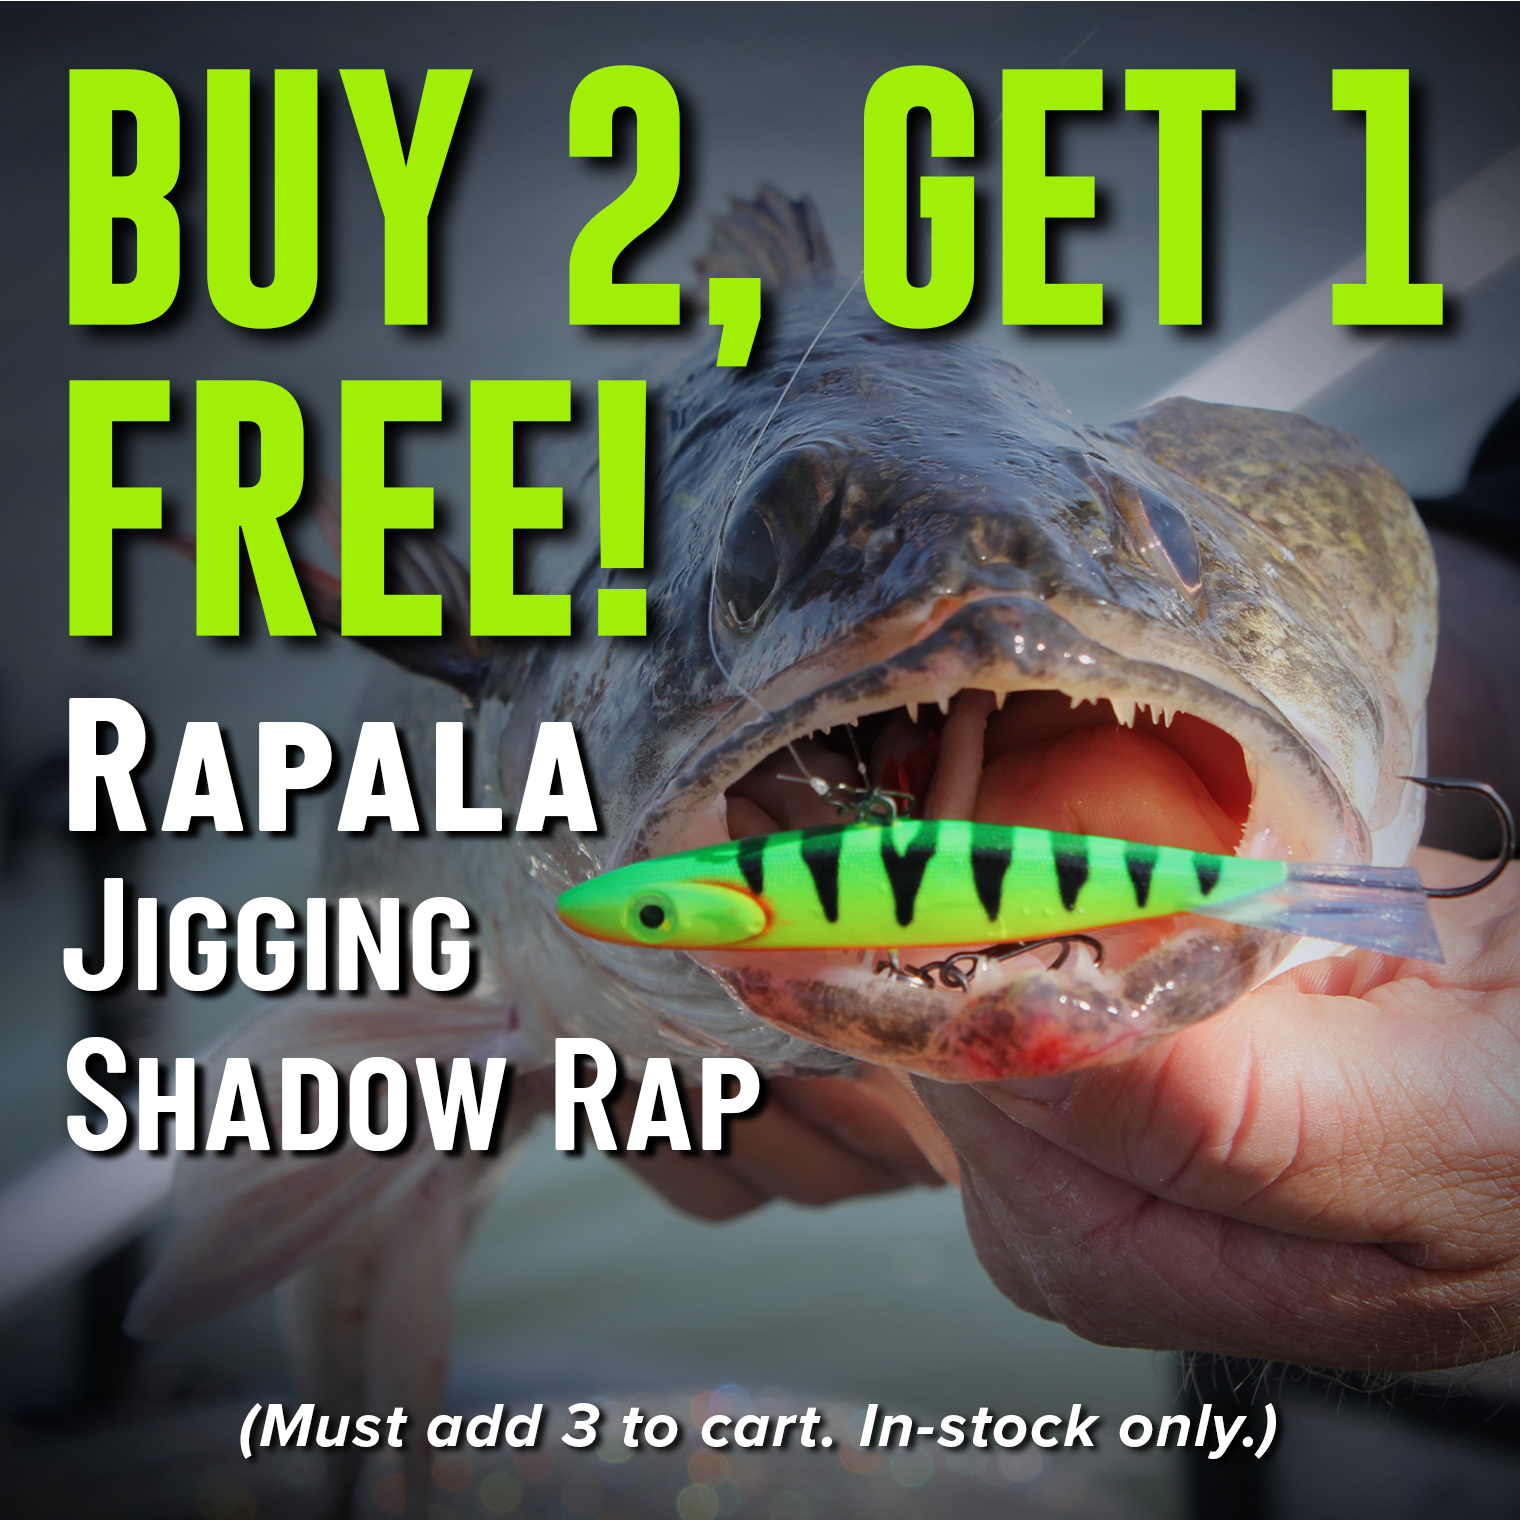 Buy 2, Get 1 Free! Rapala Jigging Shadow Rap (Must add 3 to cart. In-stock only.)